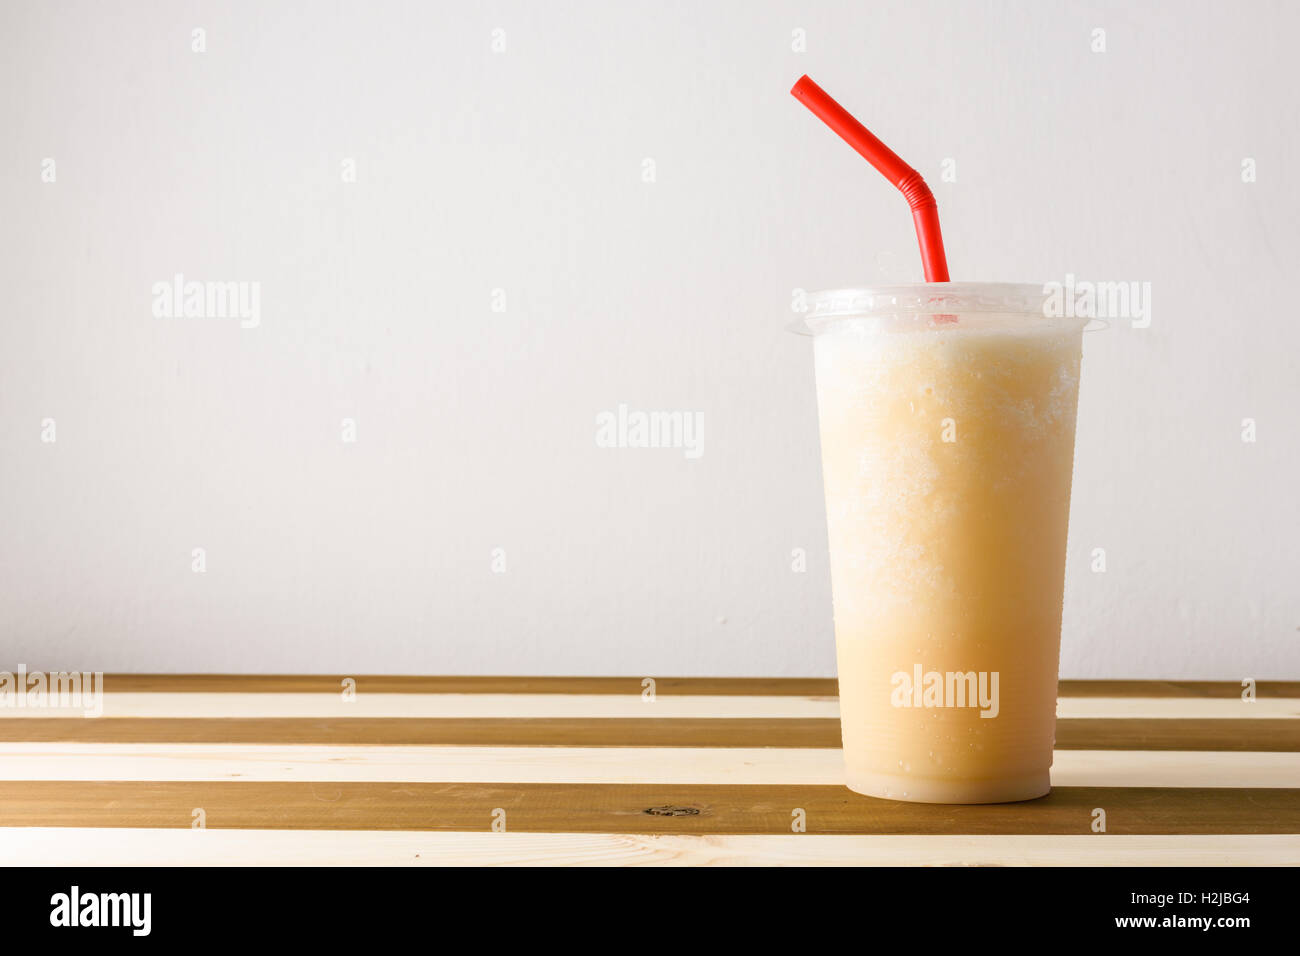 smoothies of fruit juice in plastic glass on wooden background with red tube Stock Photo